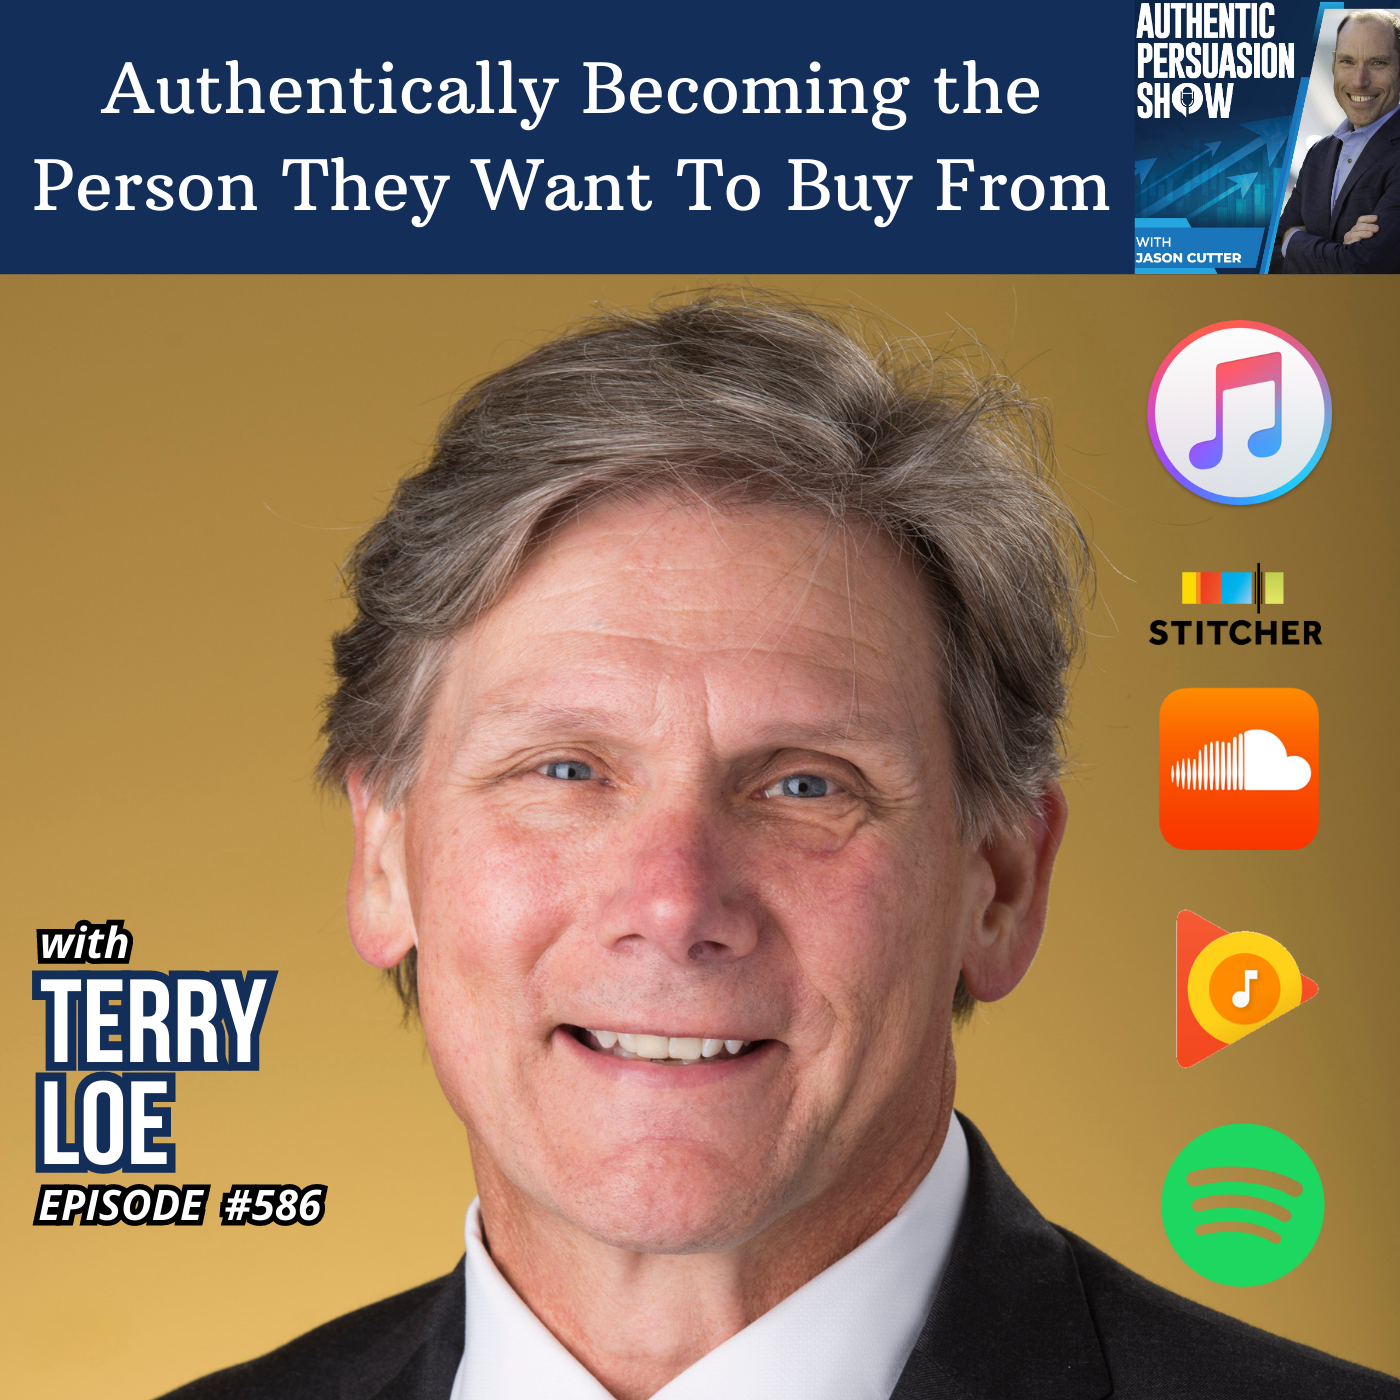 [586] Authentically Becoming the Person They Want To Buy From, with Terry Loe from Kennesaw State University